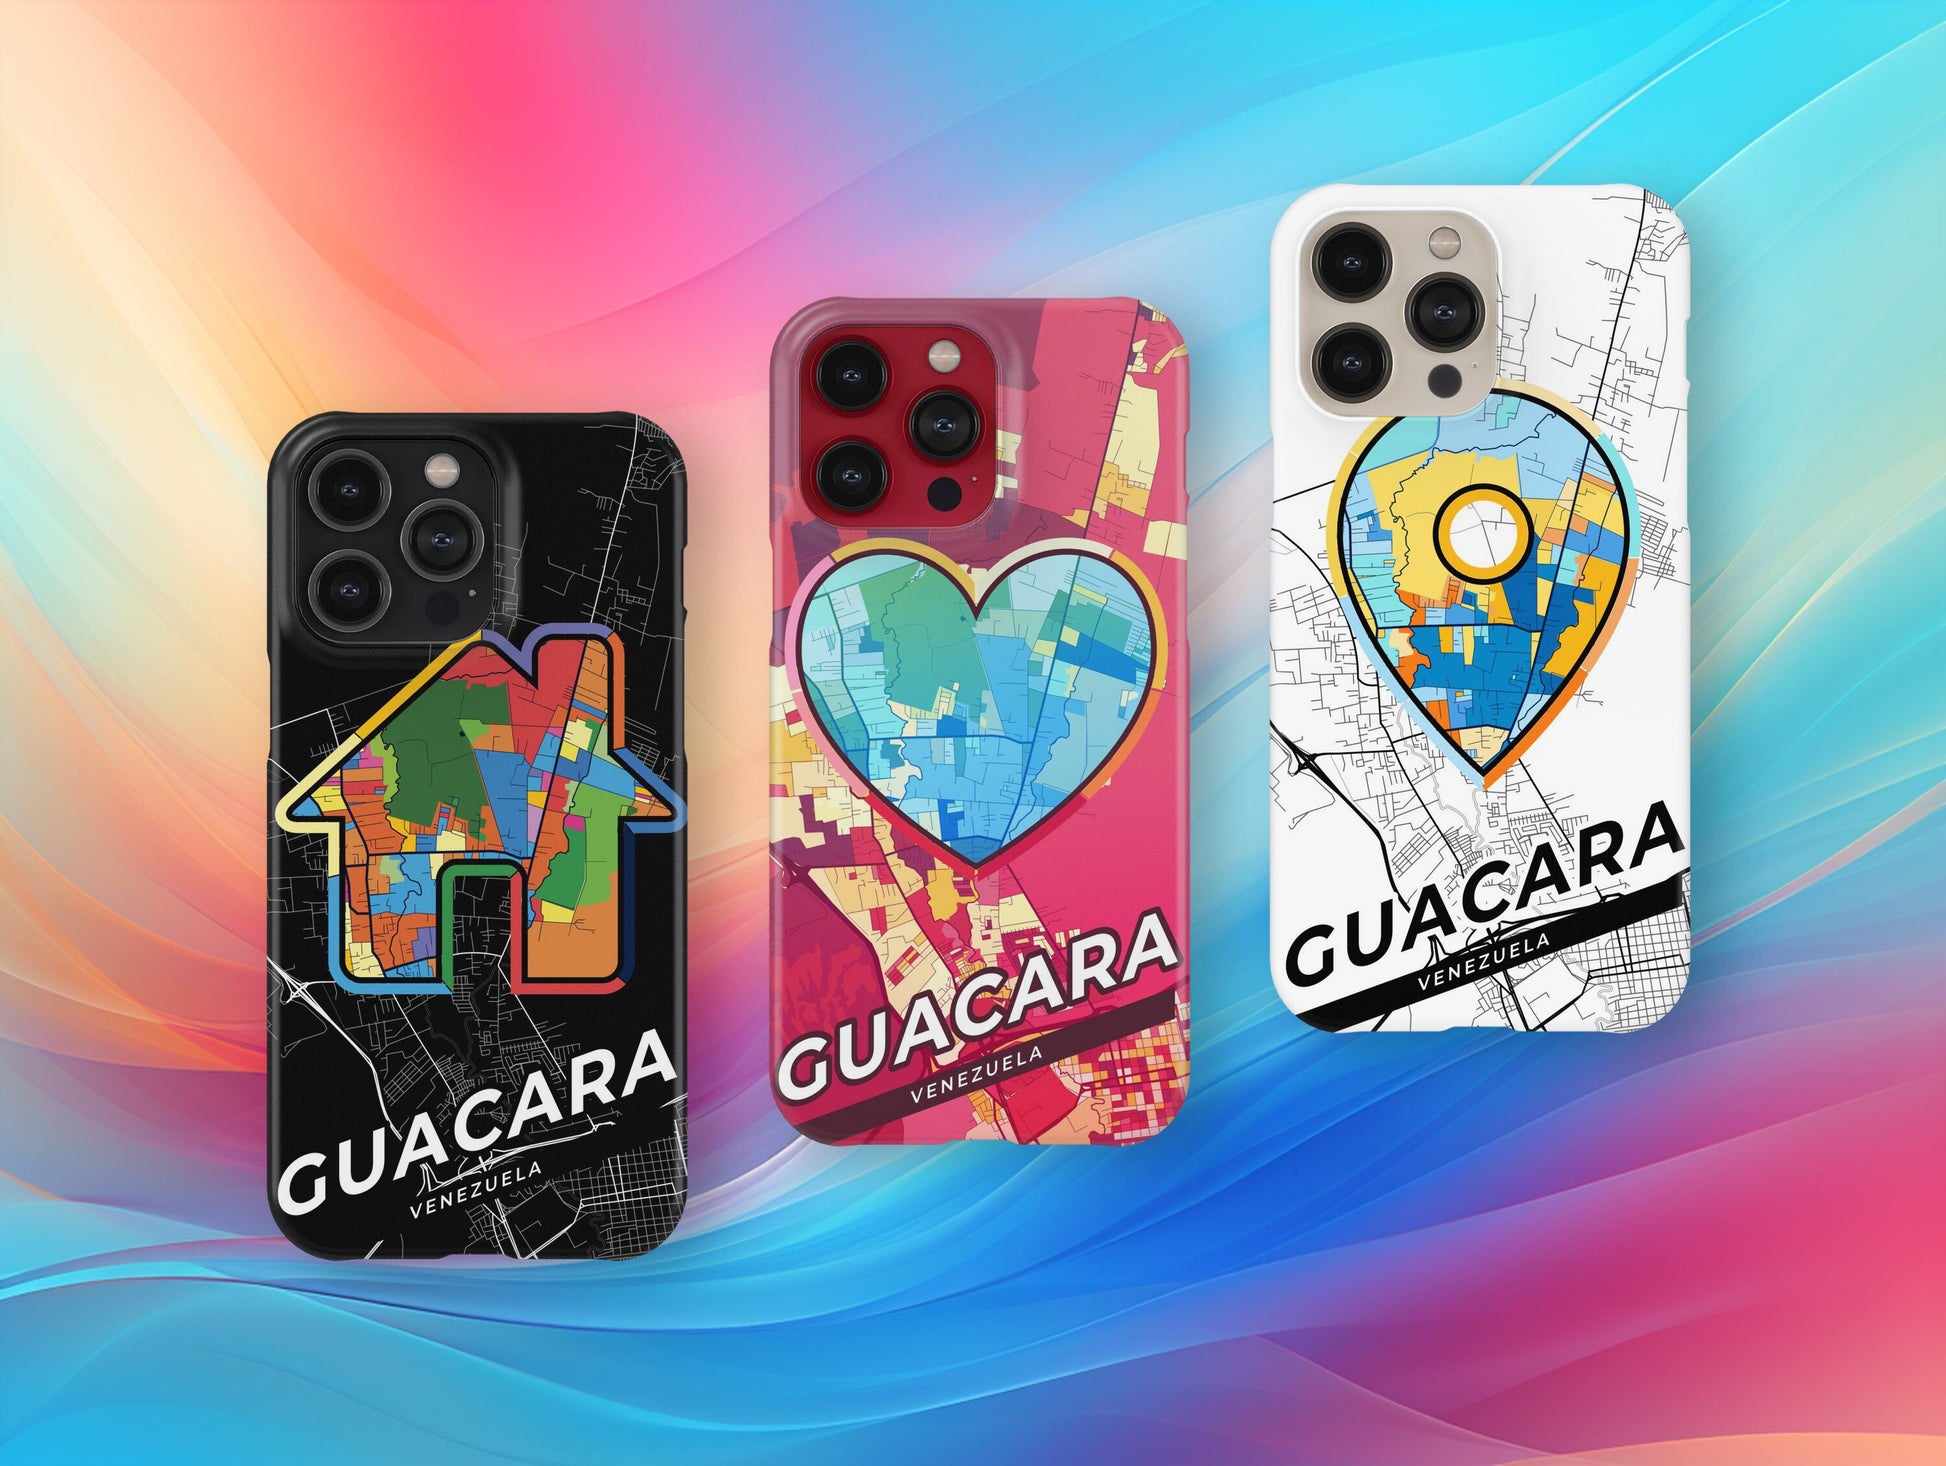 Guacara Venezuela slim phone case with colorful icon. Birthday, wedding or housewarming gift. Couple match cases.